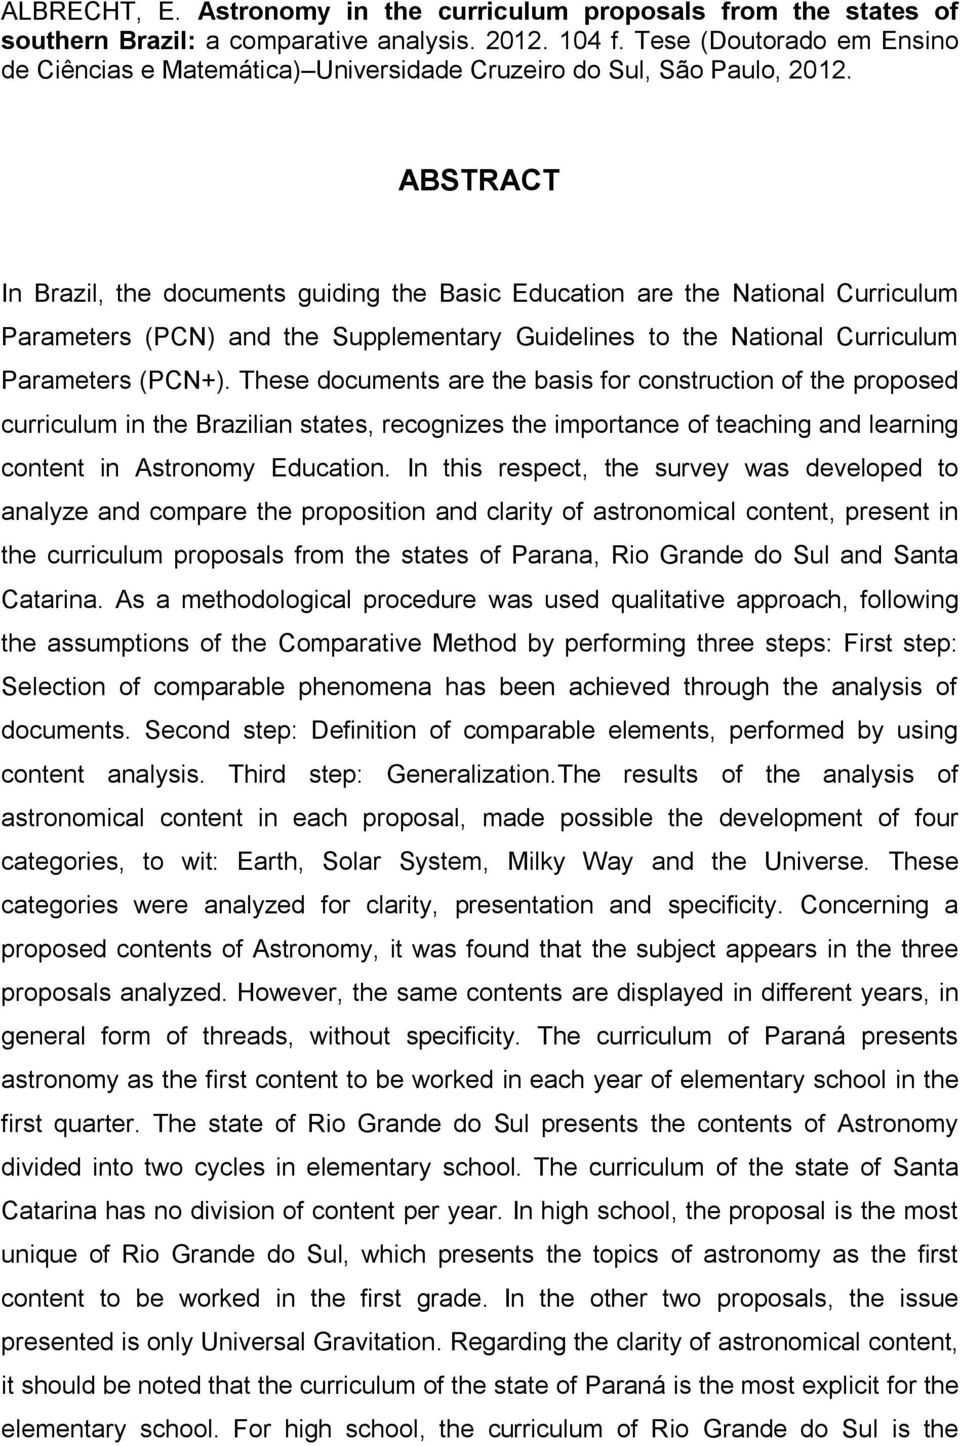 ABSTRACT In Brazil, the documents guiding the Basic Education are the National Curriculum Parameters (PCN) and the Supplementary Guidelines to the National Curriculum Parameters (PCN+).